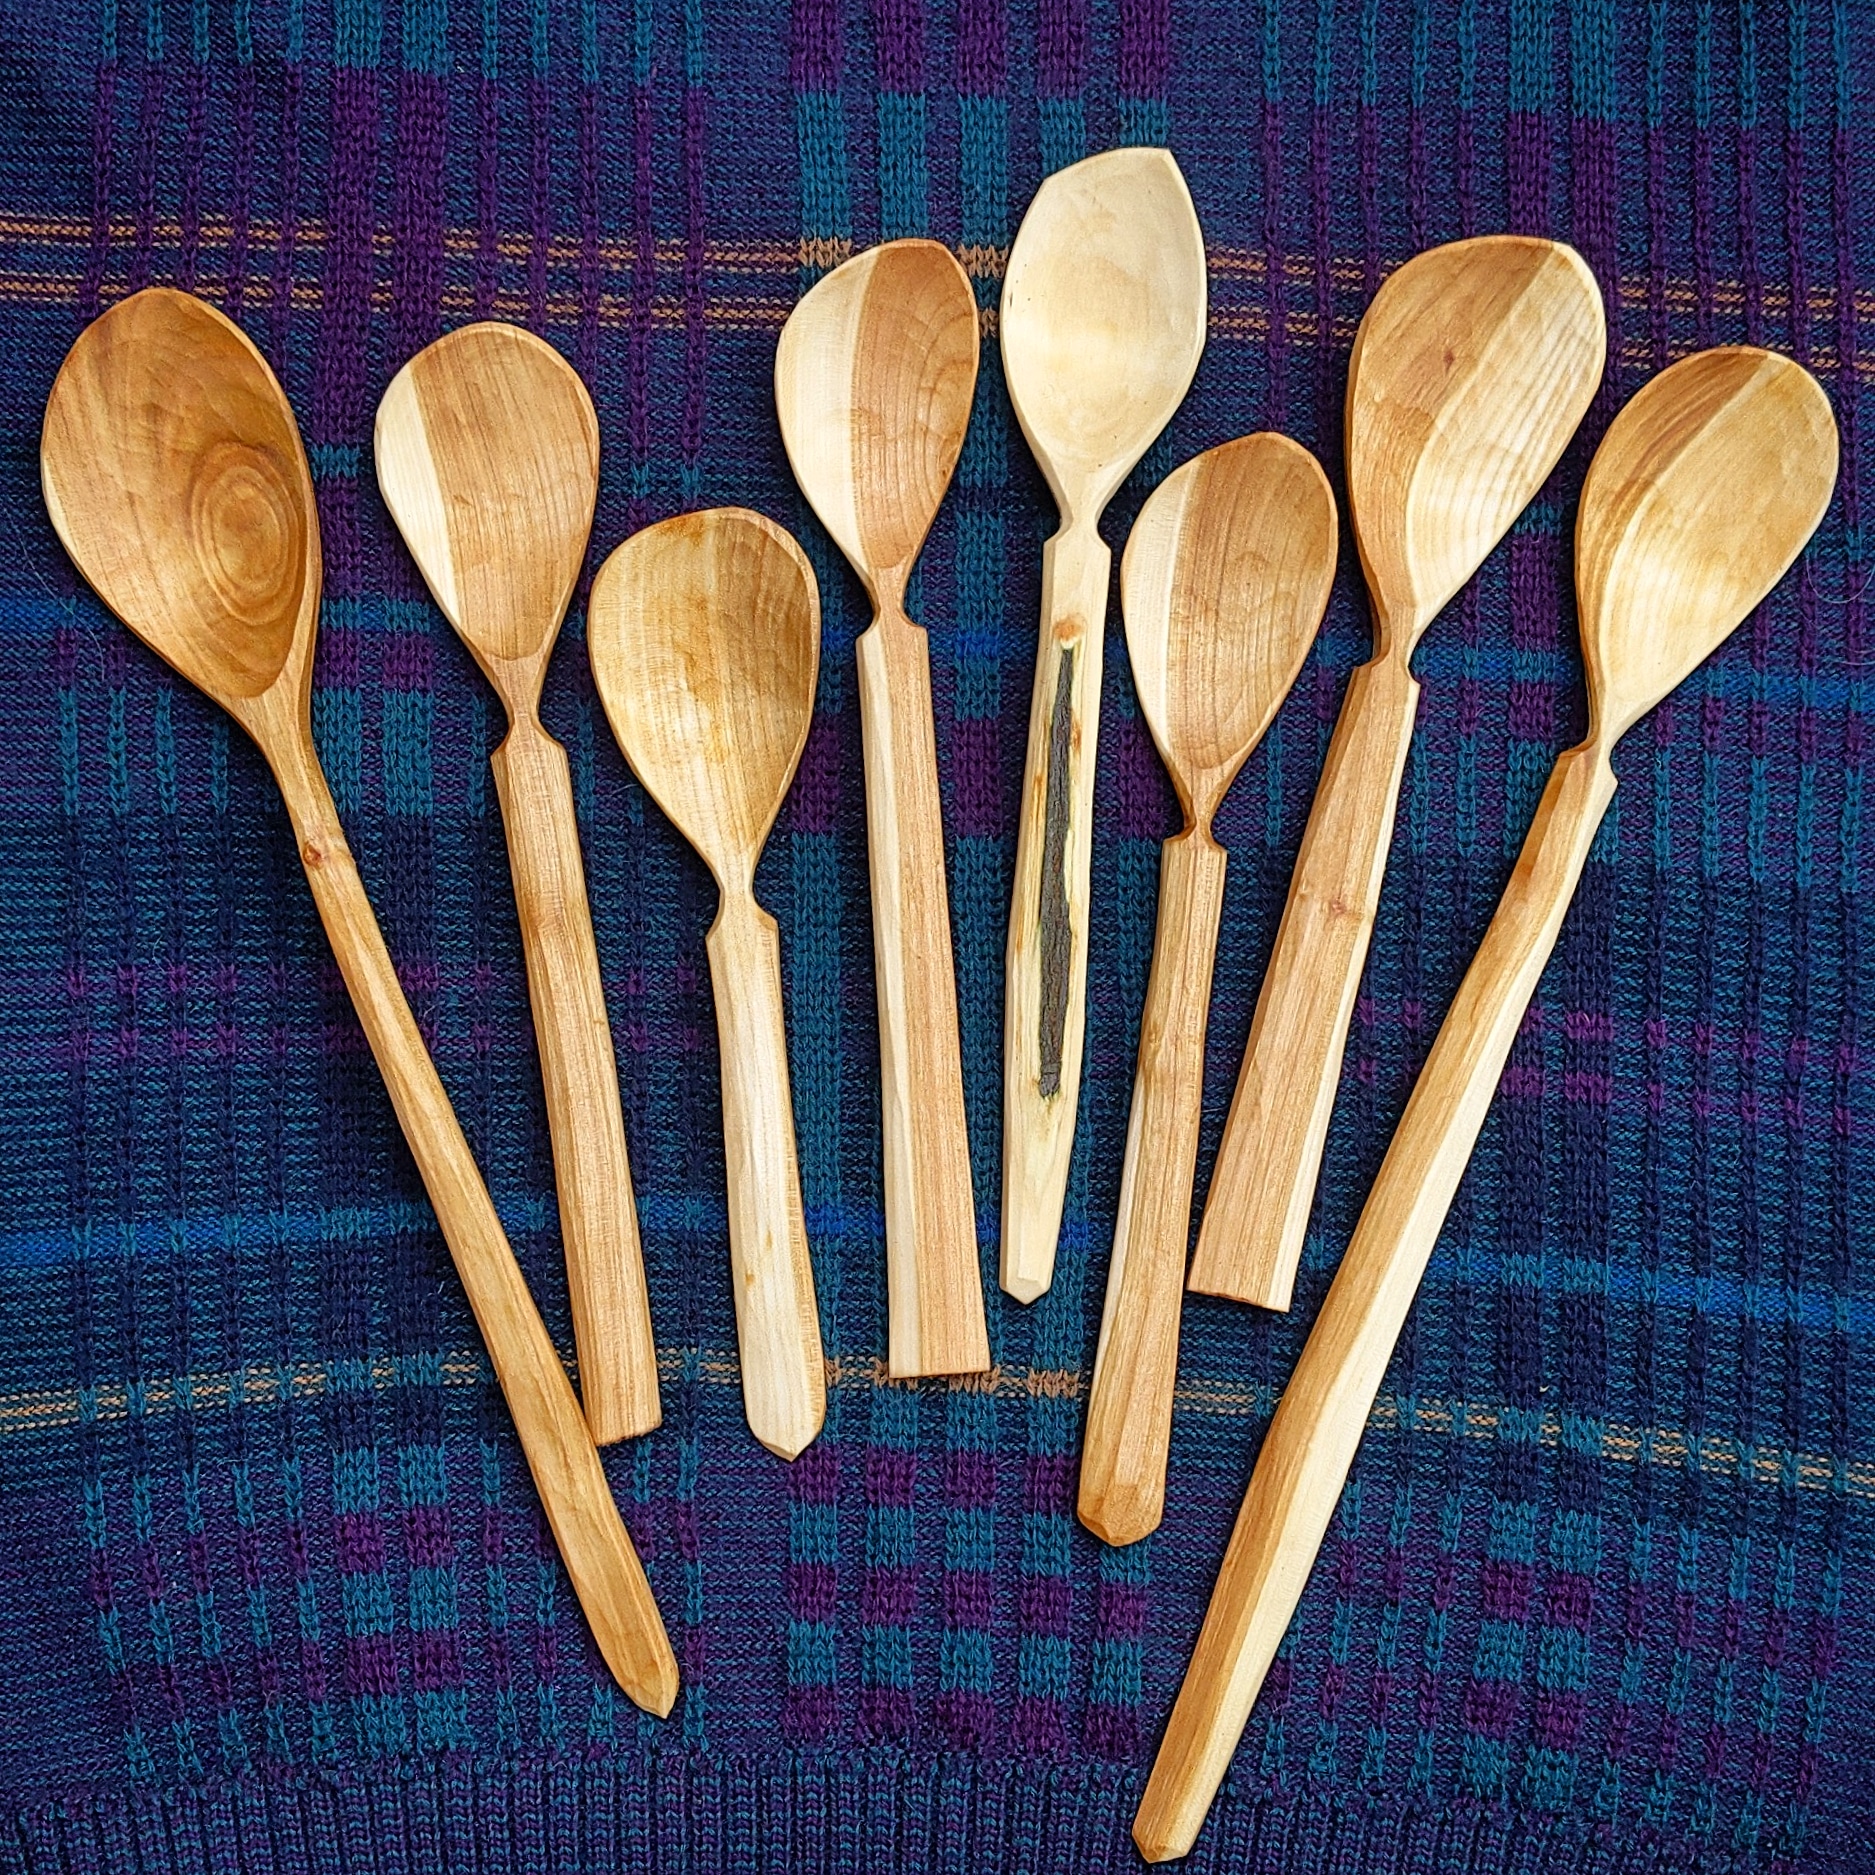 Wooden Spoon Carving Class Yamhill County Historical Society And Museums 